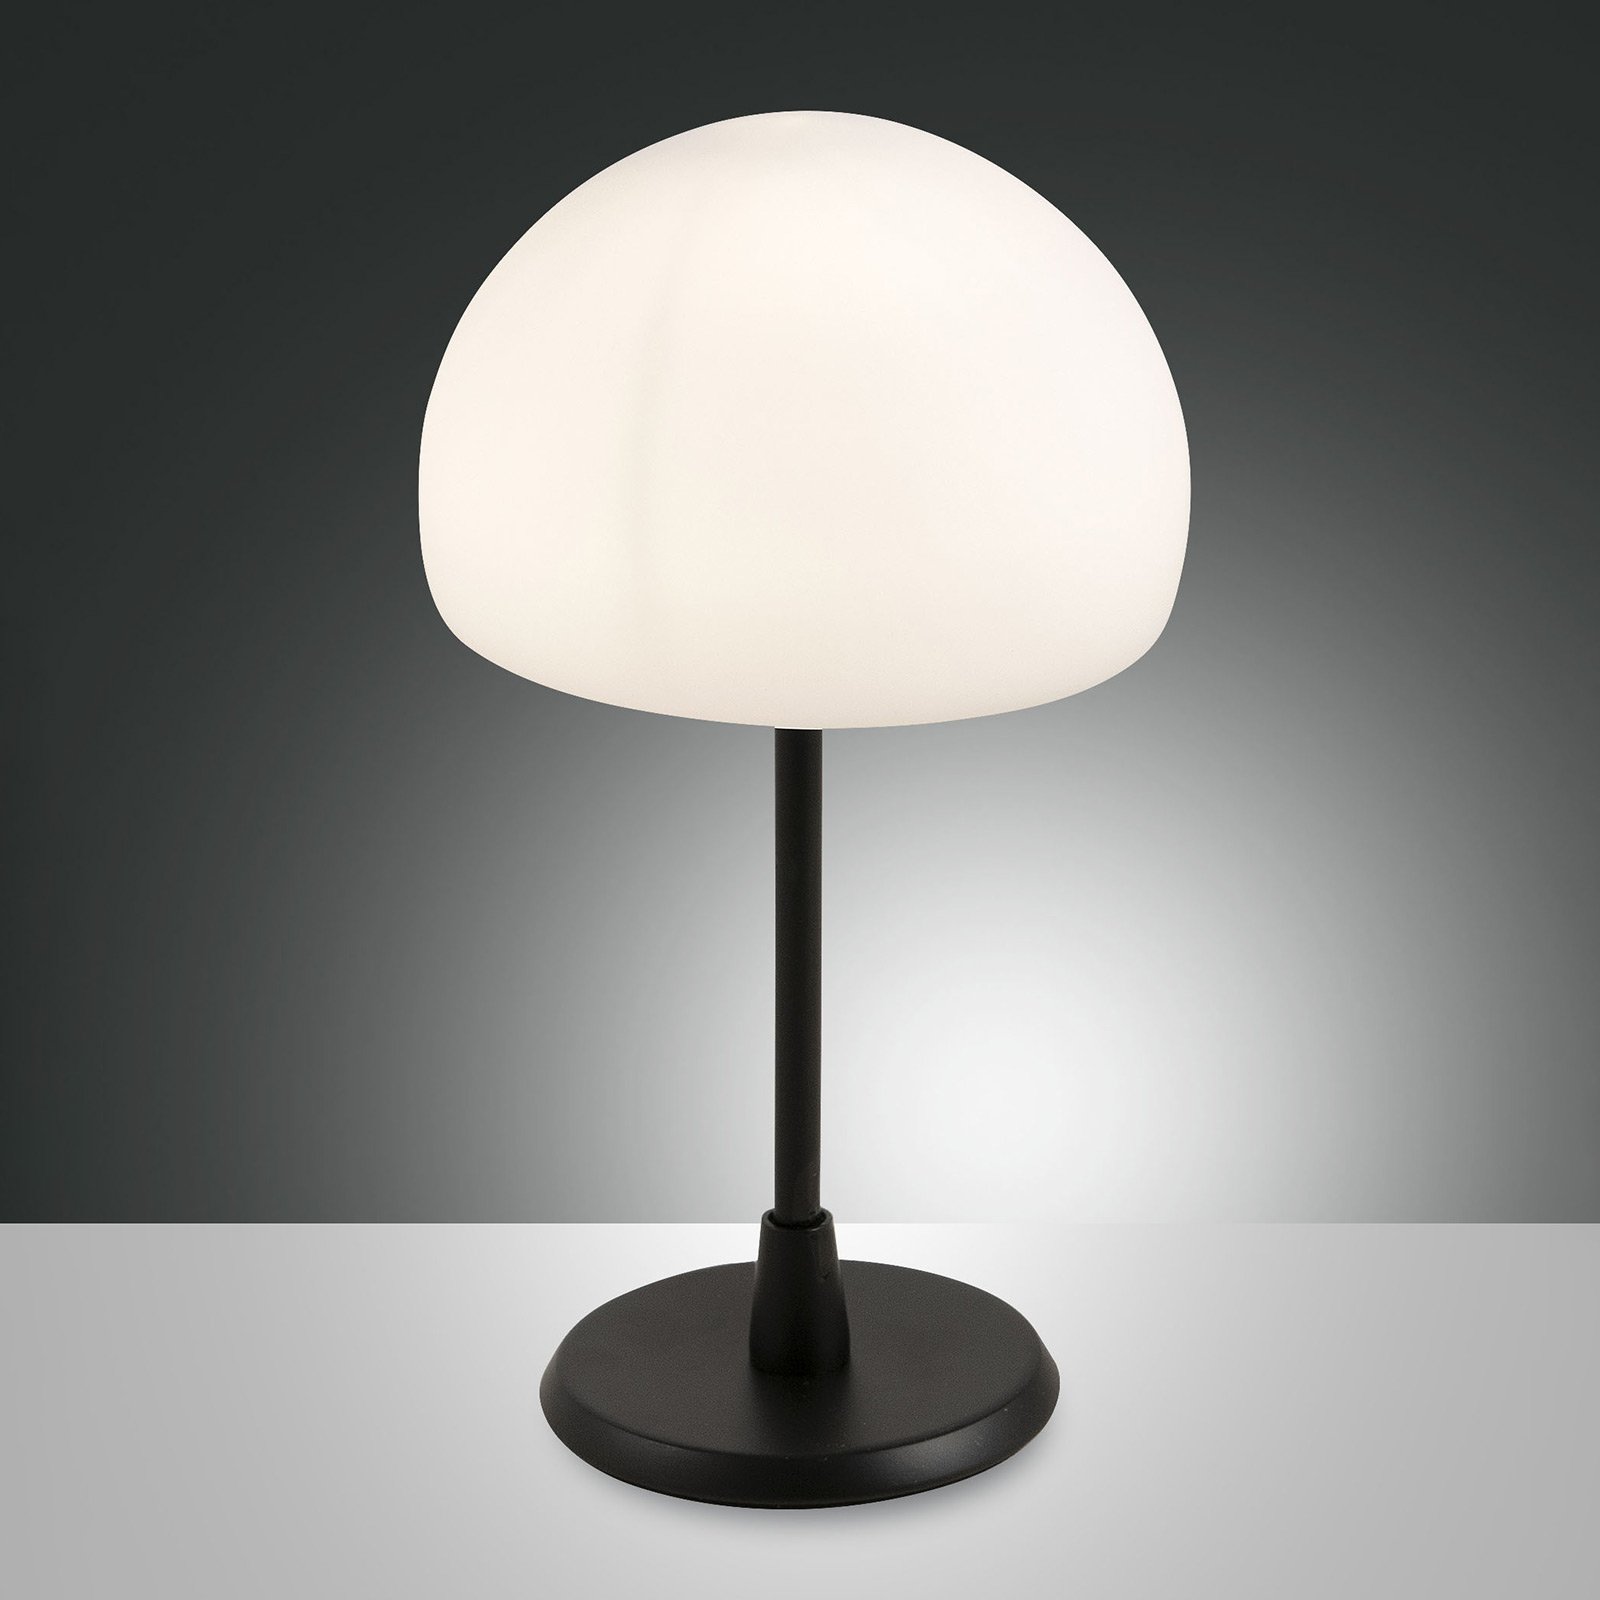 Gaia Led Table Lamp With A Touch Dimmer, Table Lamp Touch Dimmer